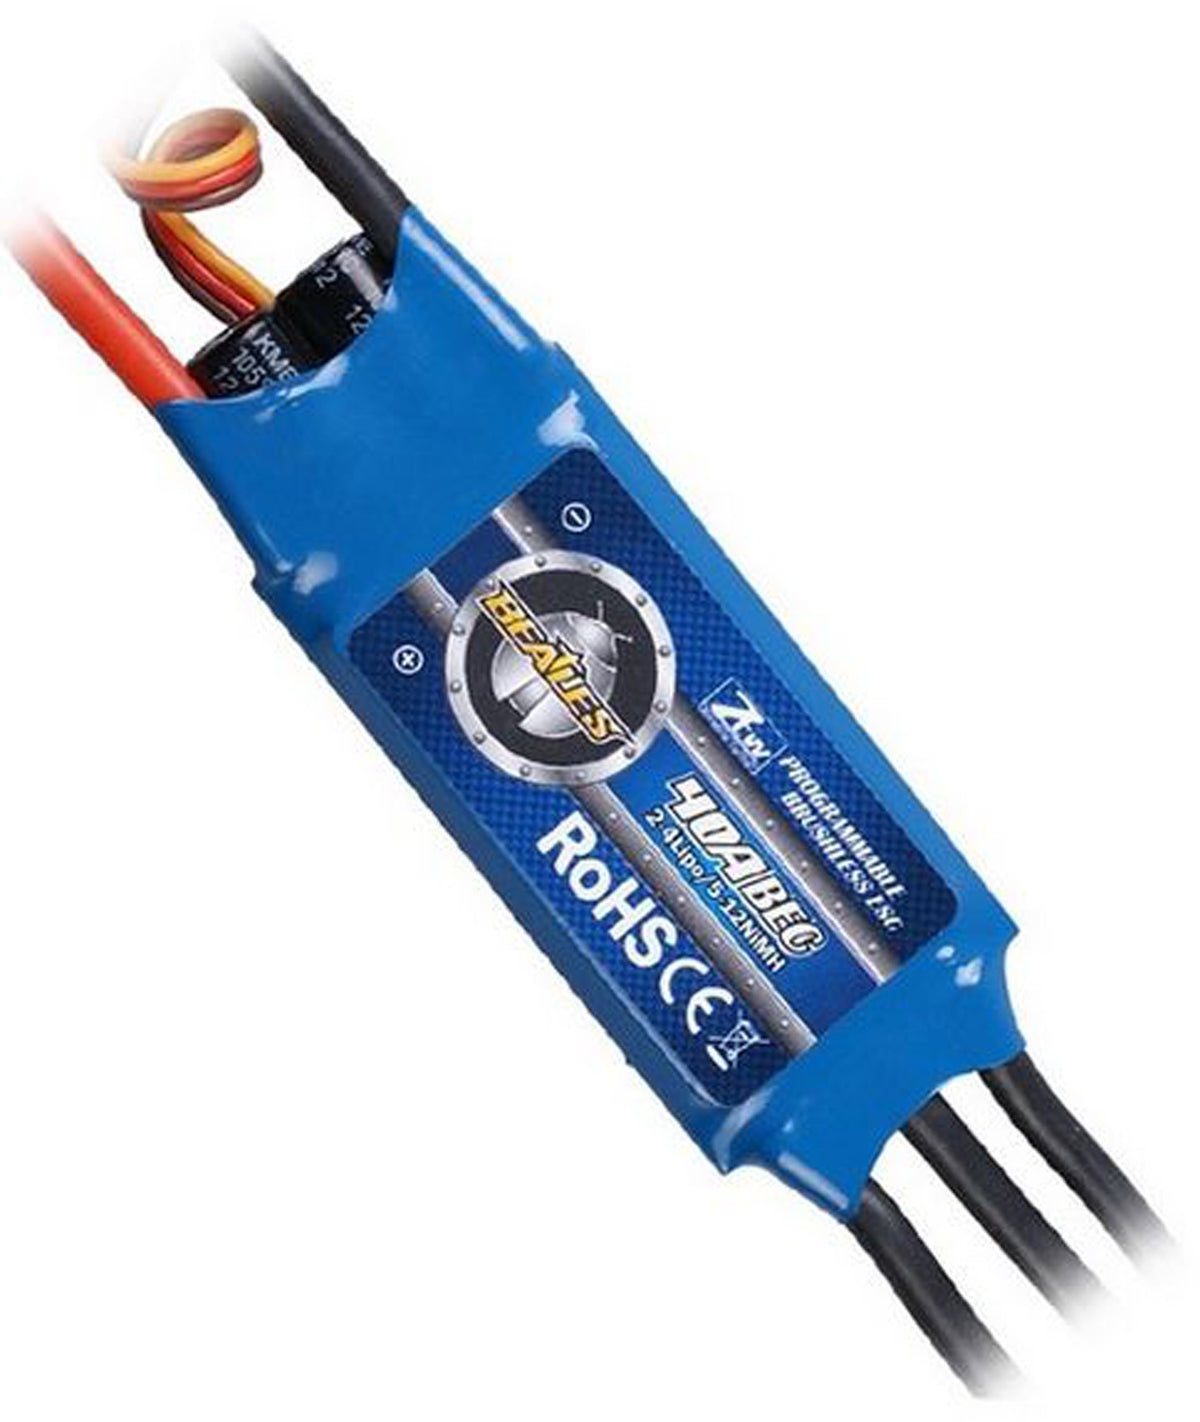 ZTW Beatles 40A Brushless ESC with 3A SBEC